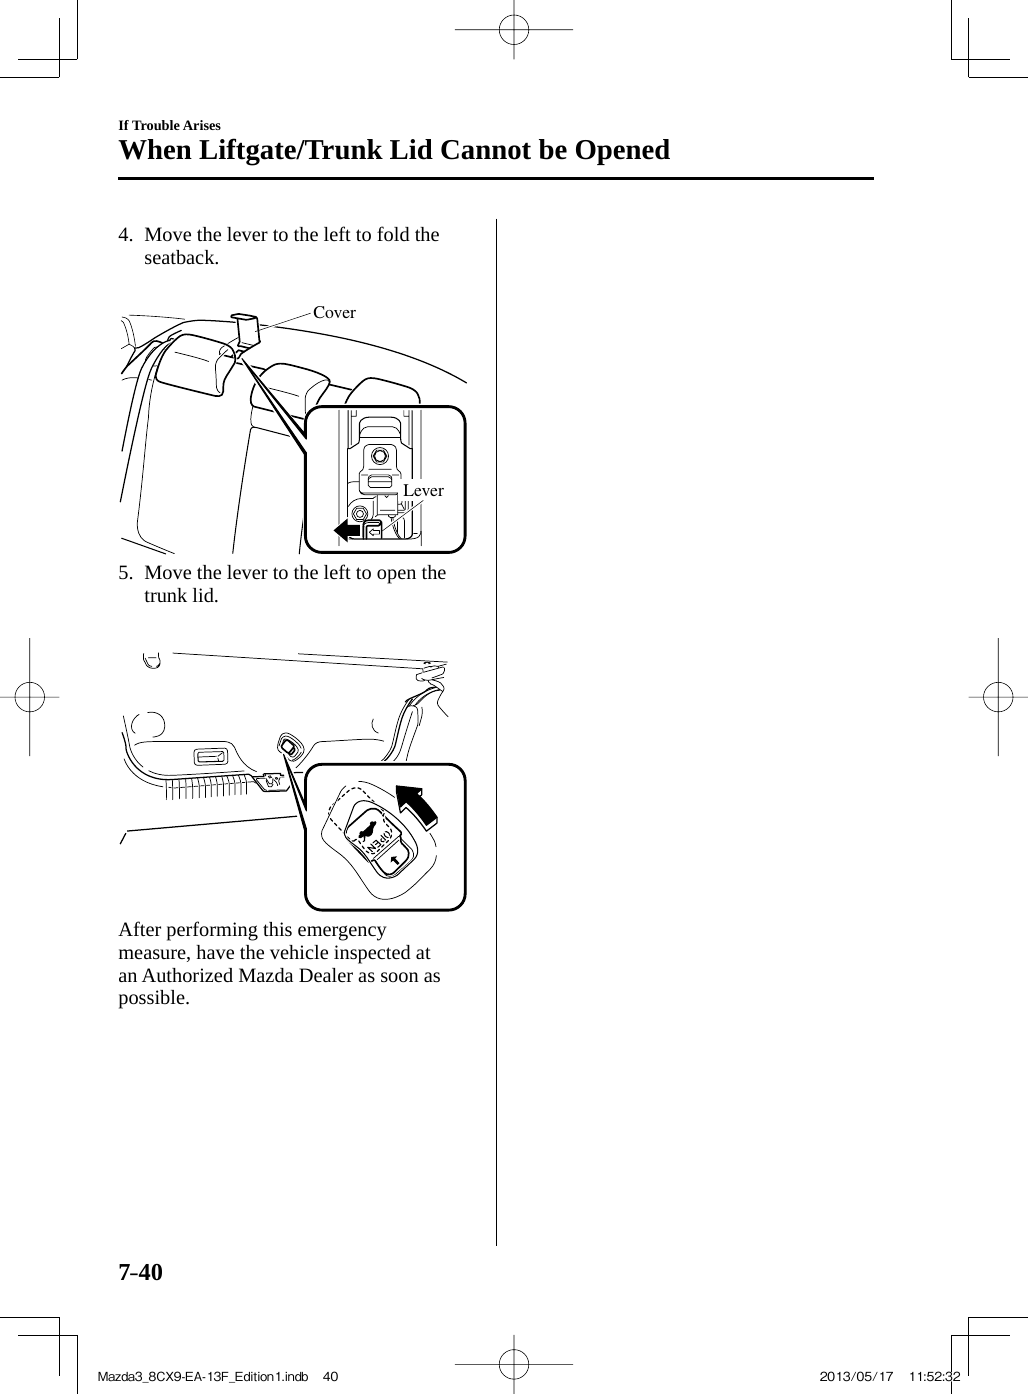 7–40If Trouble ArisesWhen Liftgate/Trunk Lid Cannot be Opened   4.   Move the lever to the left to fold the seatback.    CoverLever    5.   Move the lever to the left to open the trunk lid.          After performing this emergency measure, have the vehicle inspected at an Authorized Mazda Dealer as soon as possible.Mazda3_8CX9-EA-13F_Edition1.indb   40Mazda3_8CX9-EA-13F_Edition1.indb   40 2013/05/17   11:52:322013/05/17   11:52:32